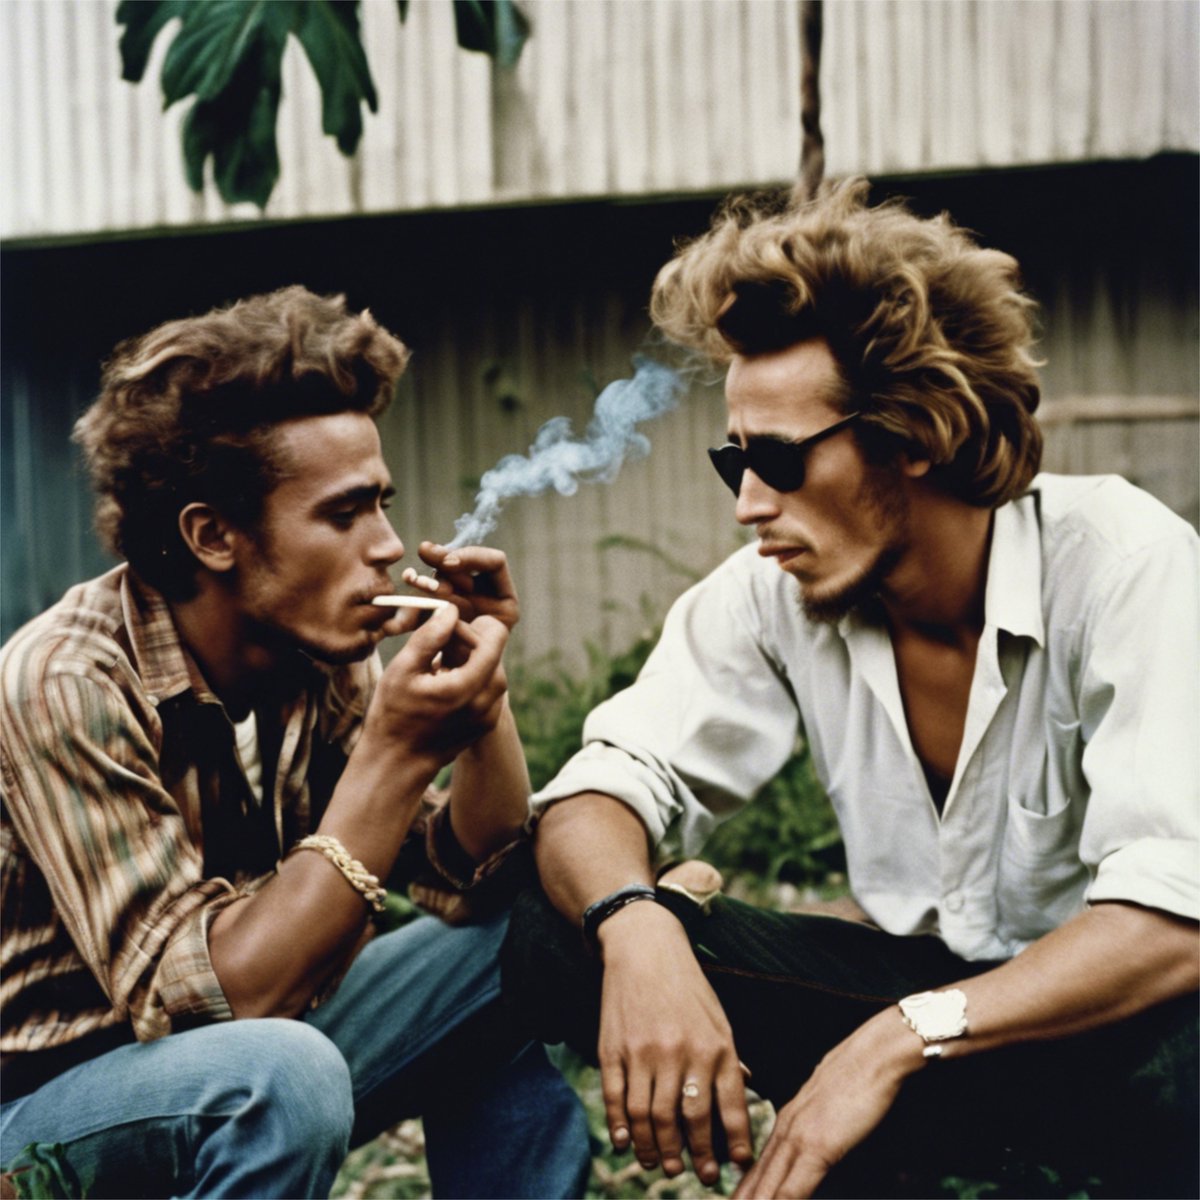 James Dean and Bob Marley, enveloped in a haze of smoke, sharing a moment of timeless rebellion and profound introspection fineartamerica.com/featured/james…